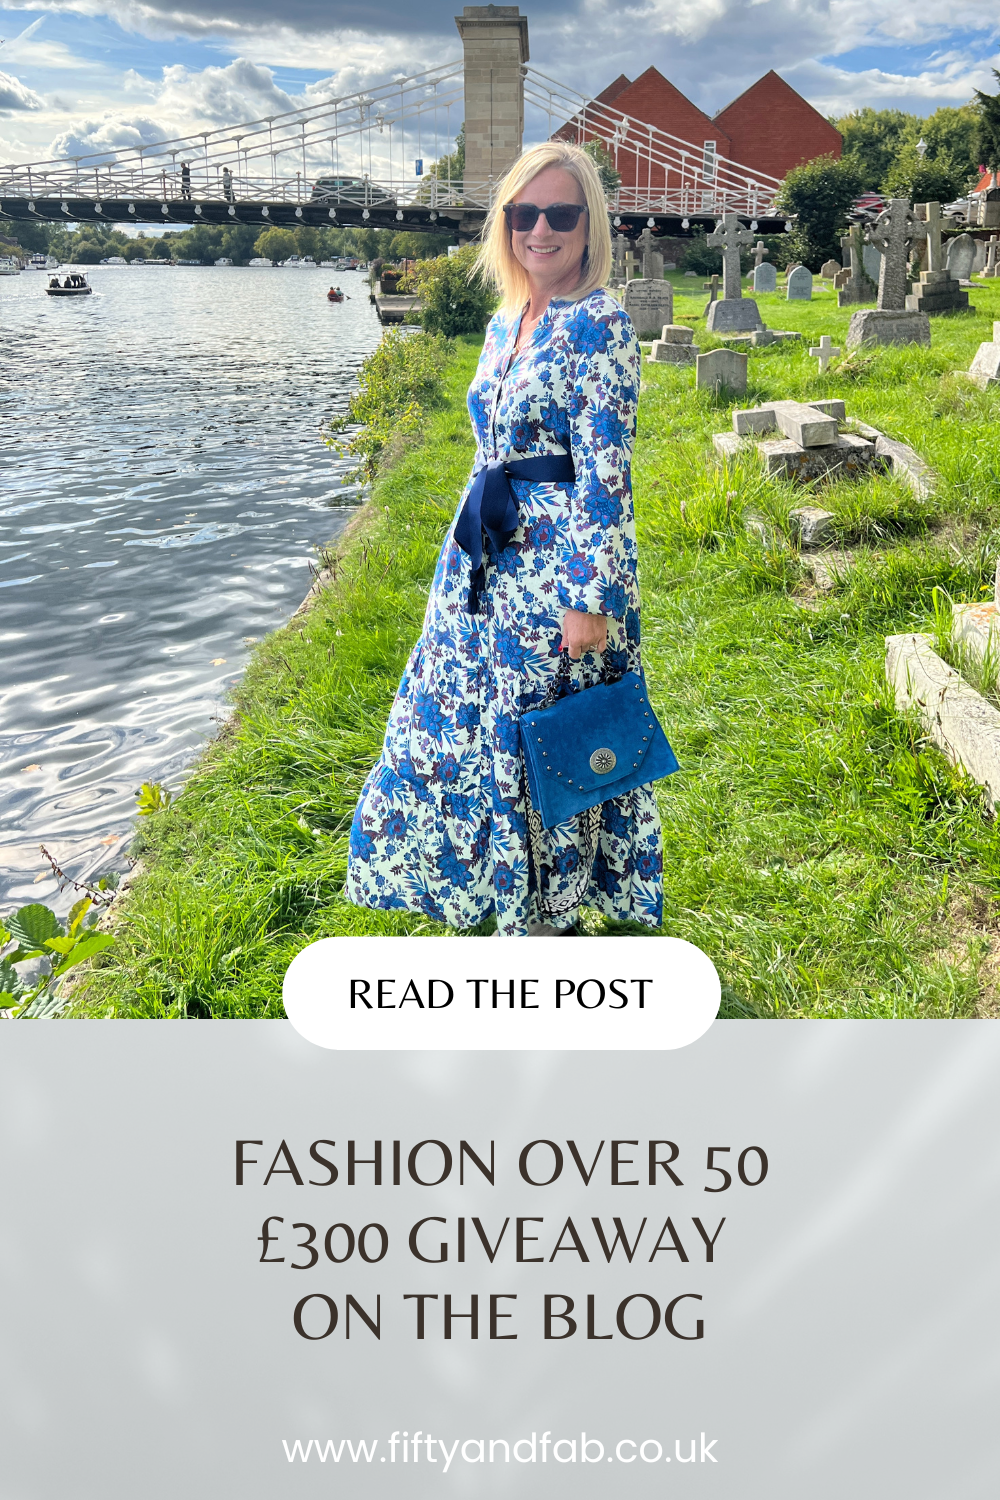 Fashion Over 50 Blog Giveaway